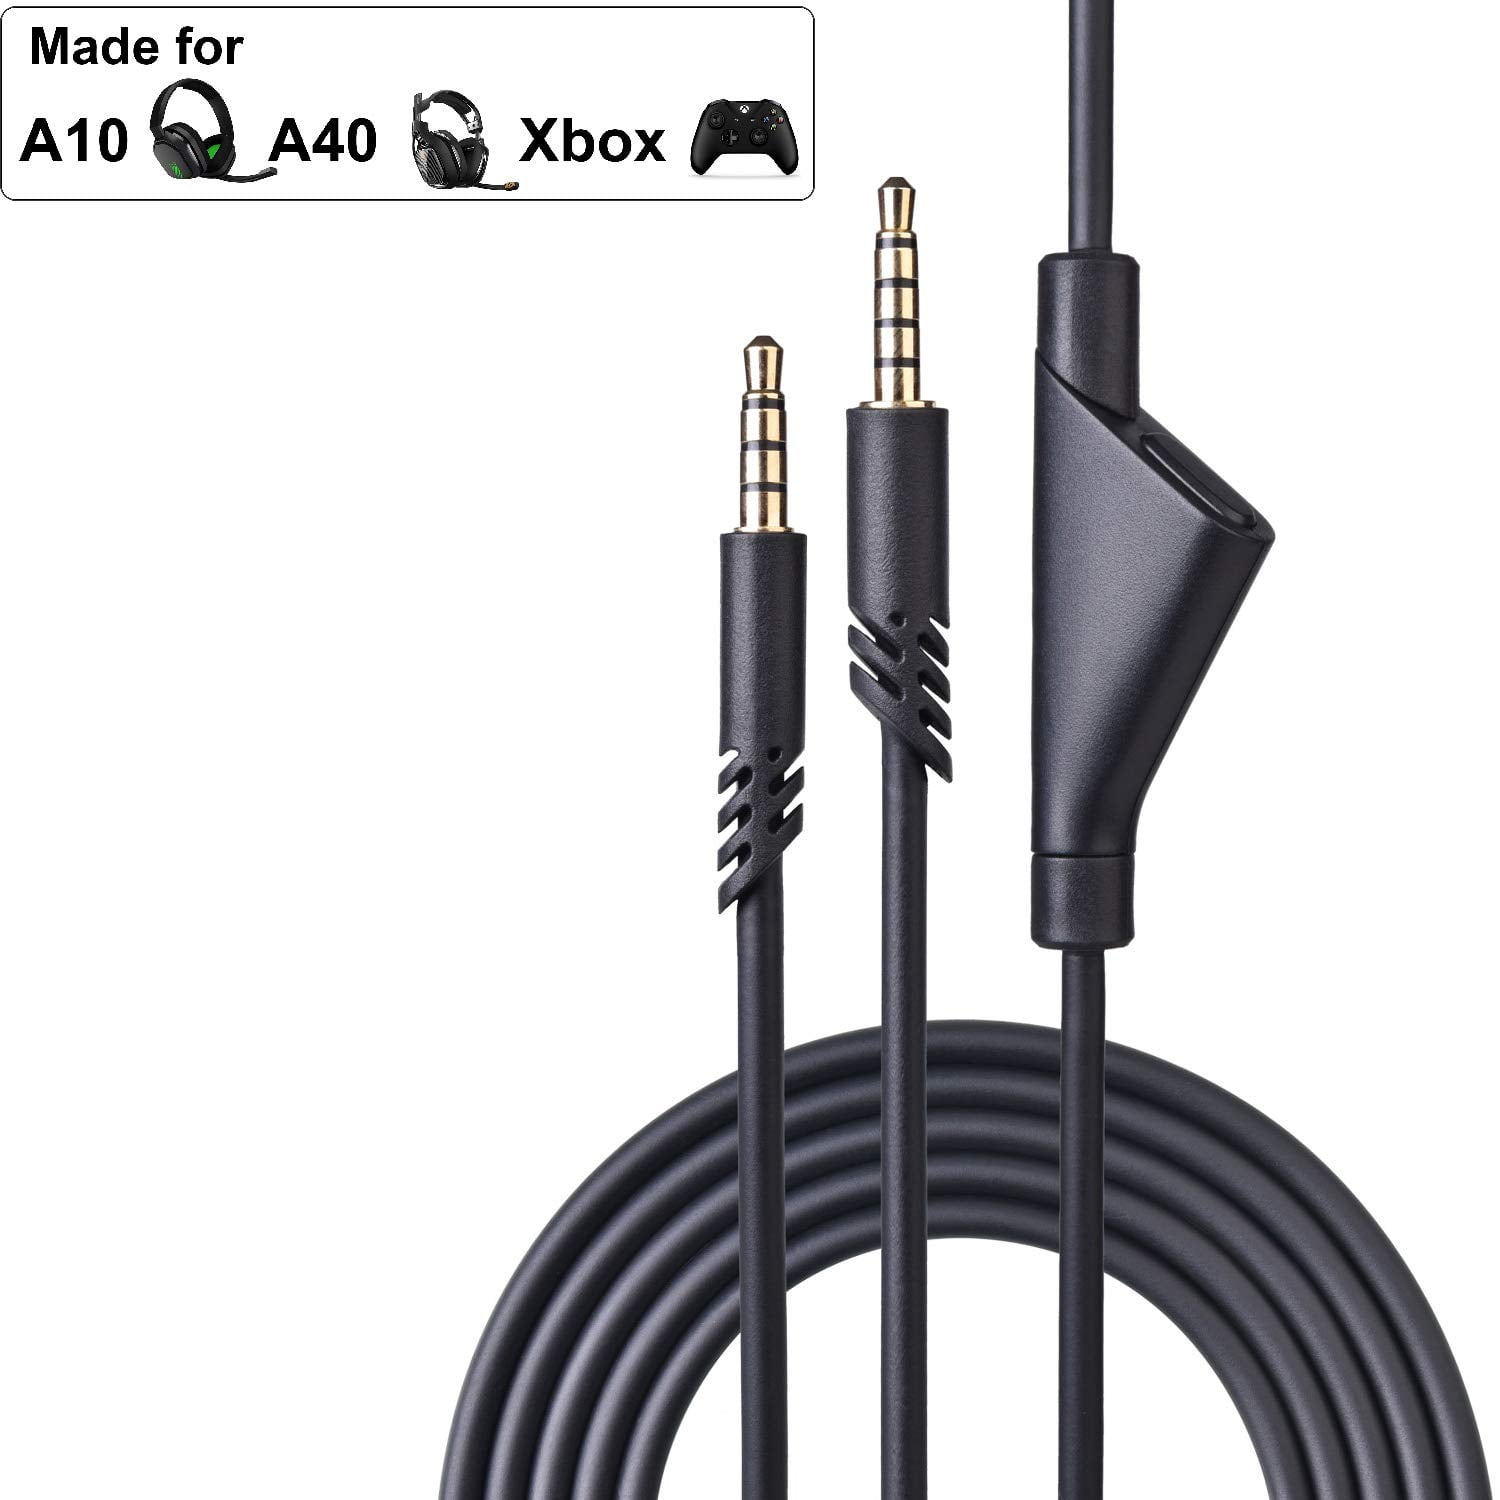 Cable Length: Speaker Occus Cables Laptop Built-in Speaker for ASUS A40 A40D A40JA A40JC A40JE A40JR K42